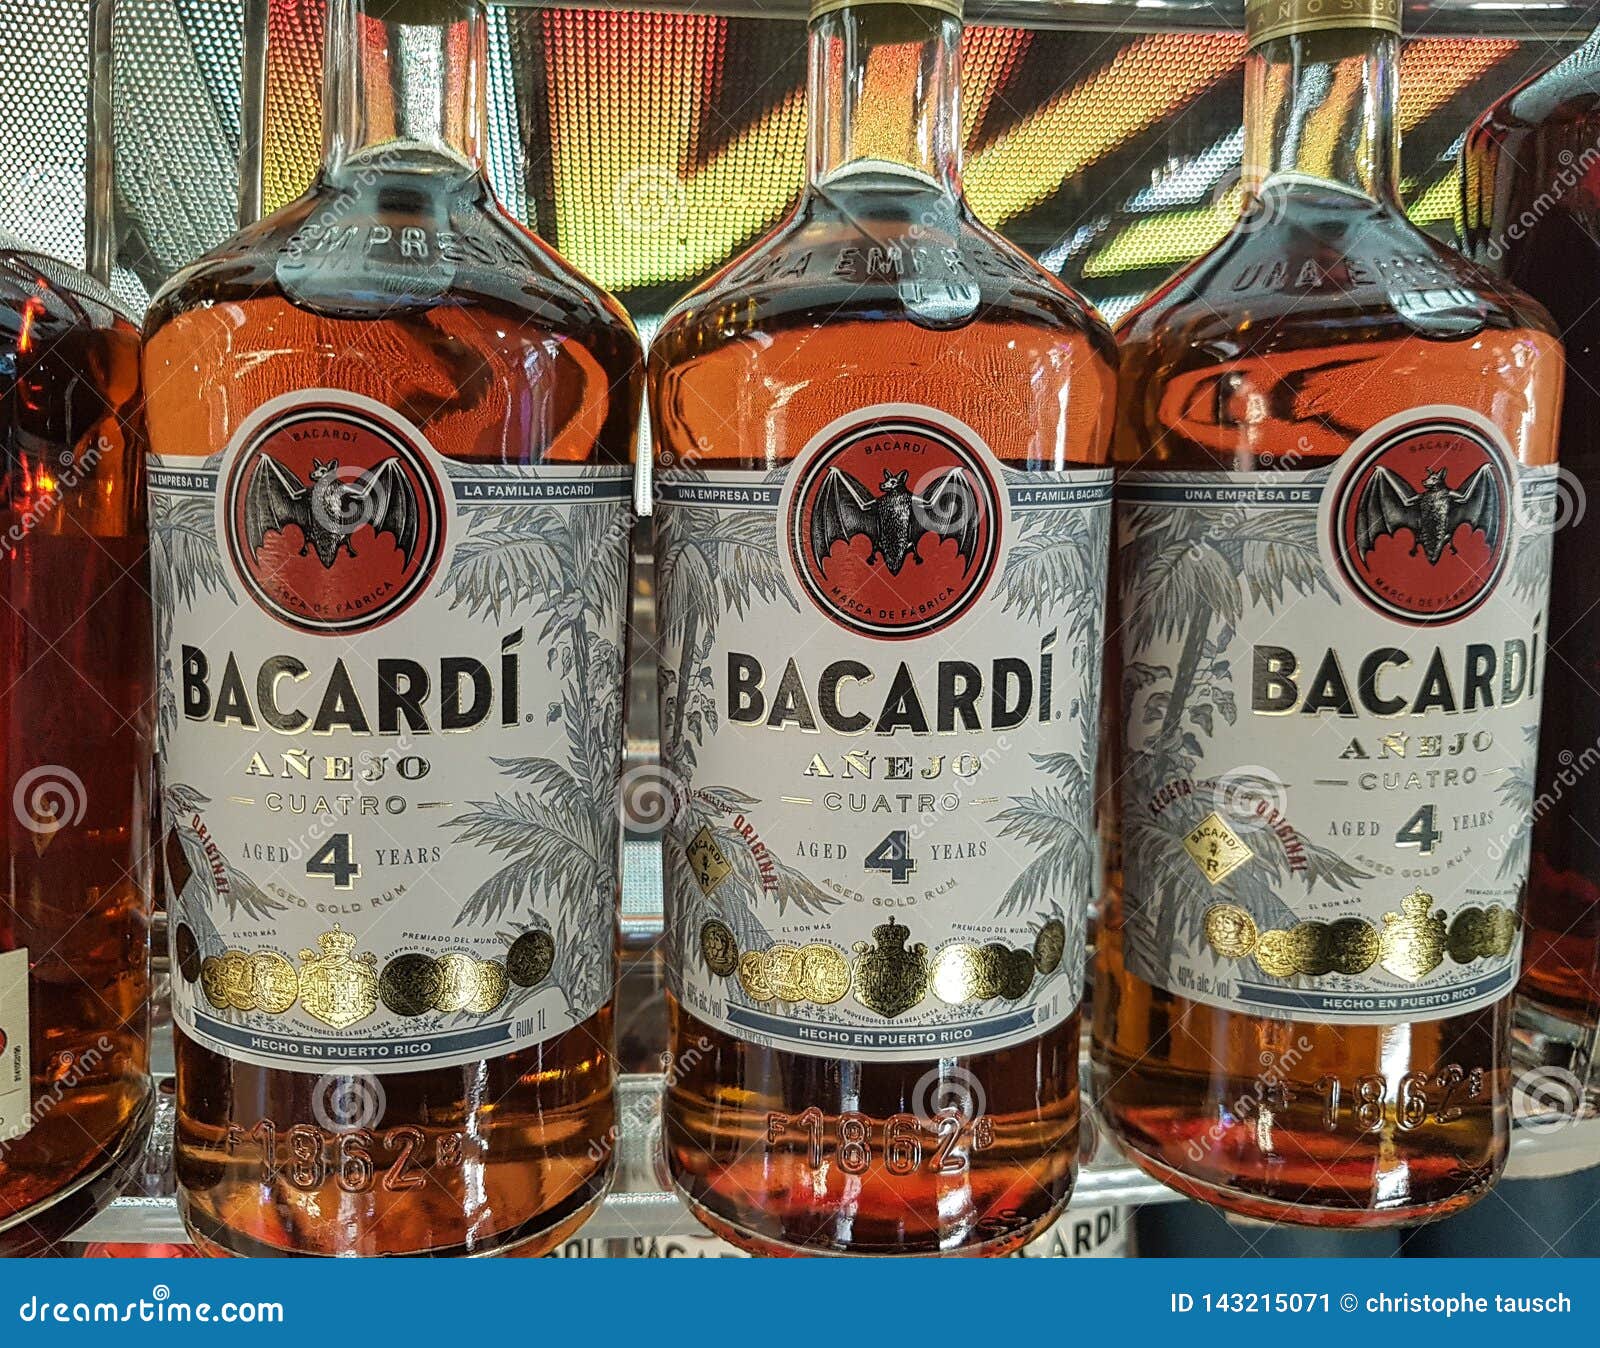 picture-bacardi-bottles-sale-very-well-known-rum-made-puerto-rico-exported-all-around-world-picture-bacardi-143215071.jpg